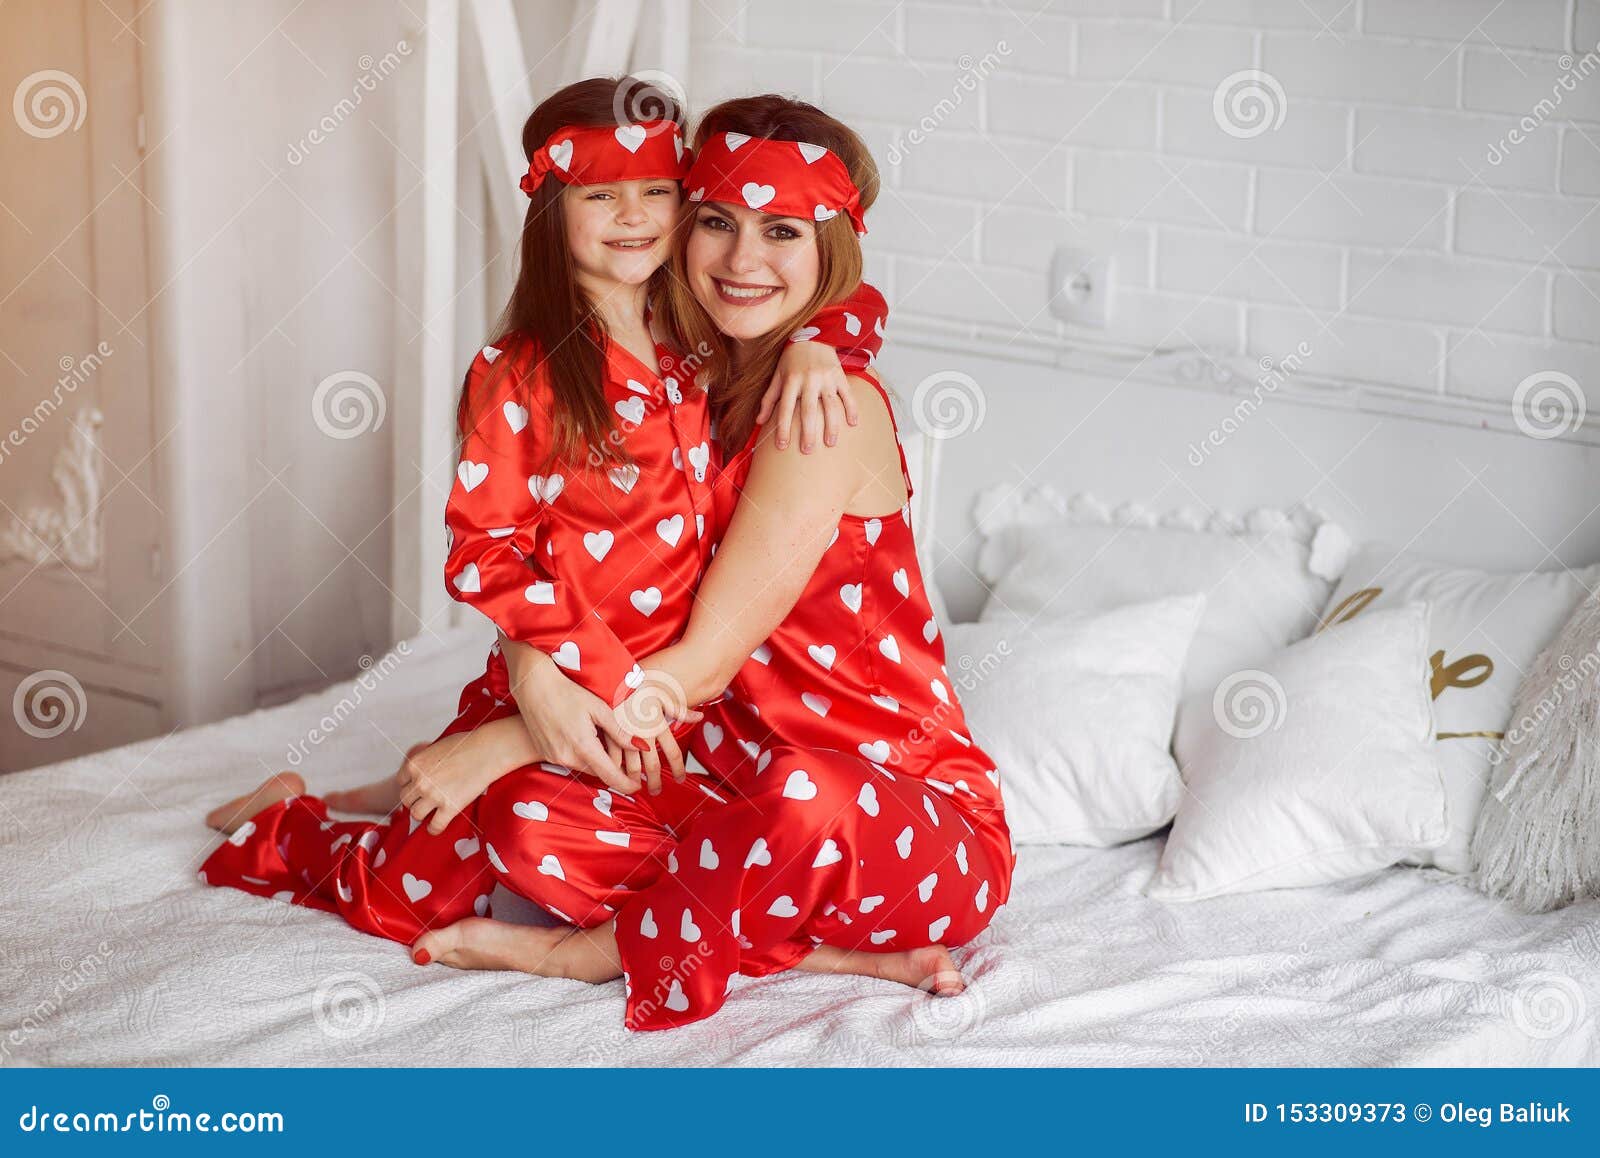 Cute Mother and Daughter at Home in a Pajamas Stock Image - Image of ...